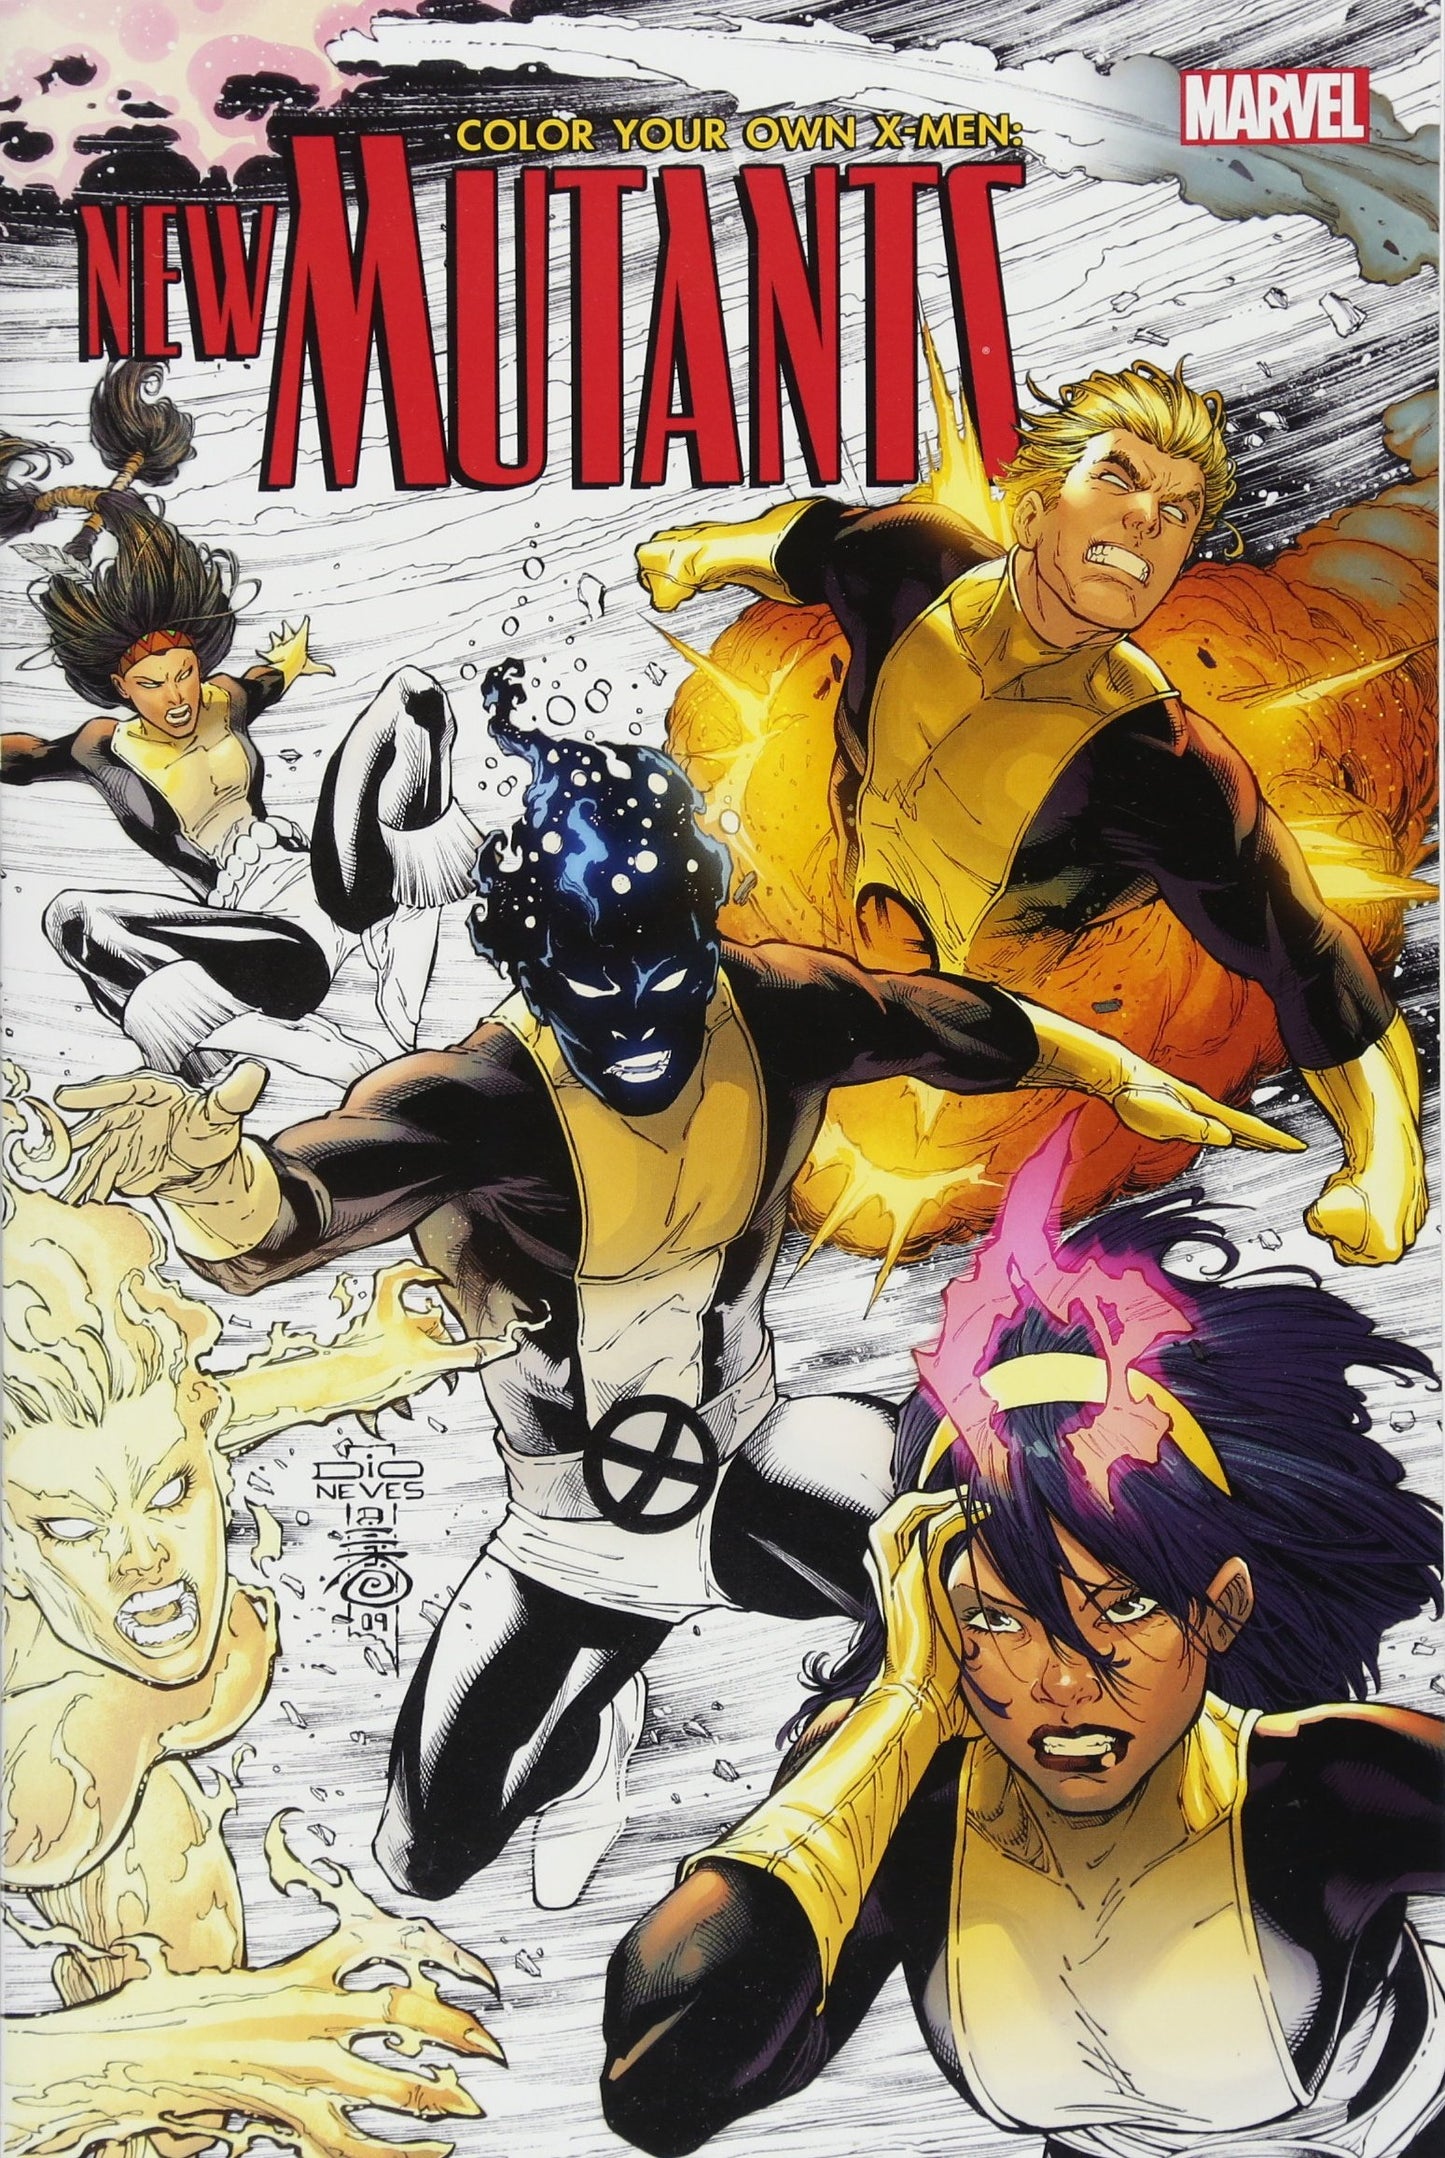 New Mutant Color Your Own X-Men Coloring Book